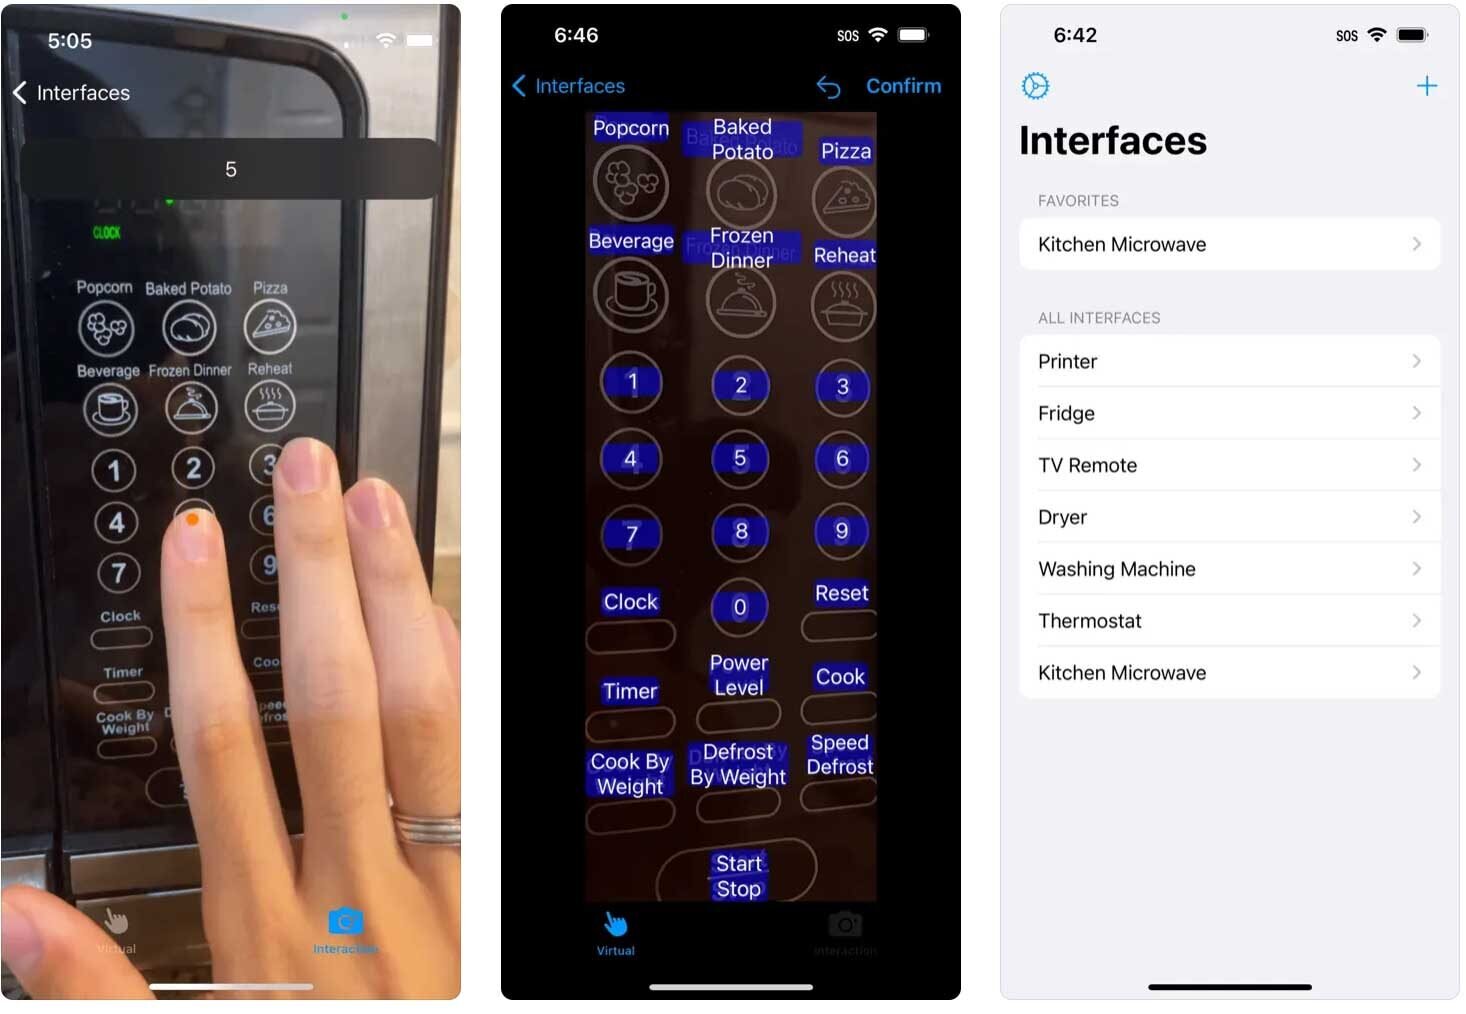 New apps for visually impaired users provide virtual labels for controls and a way to explore images